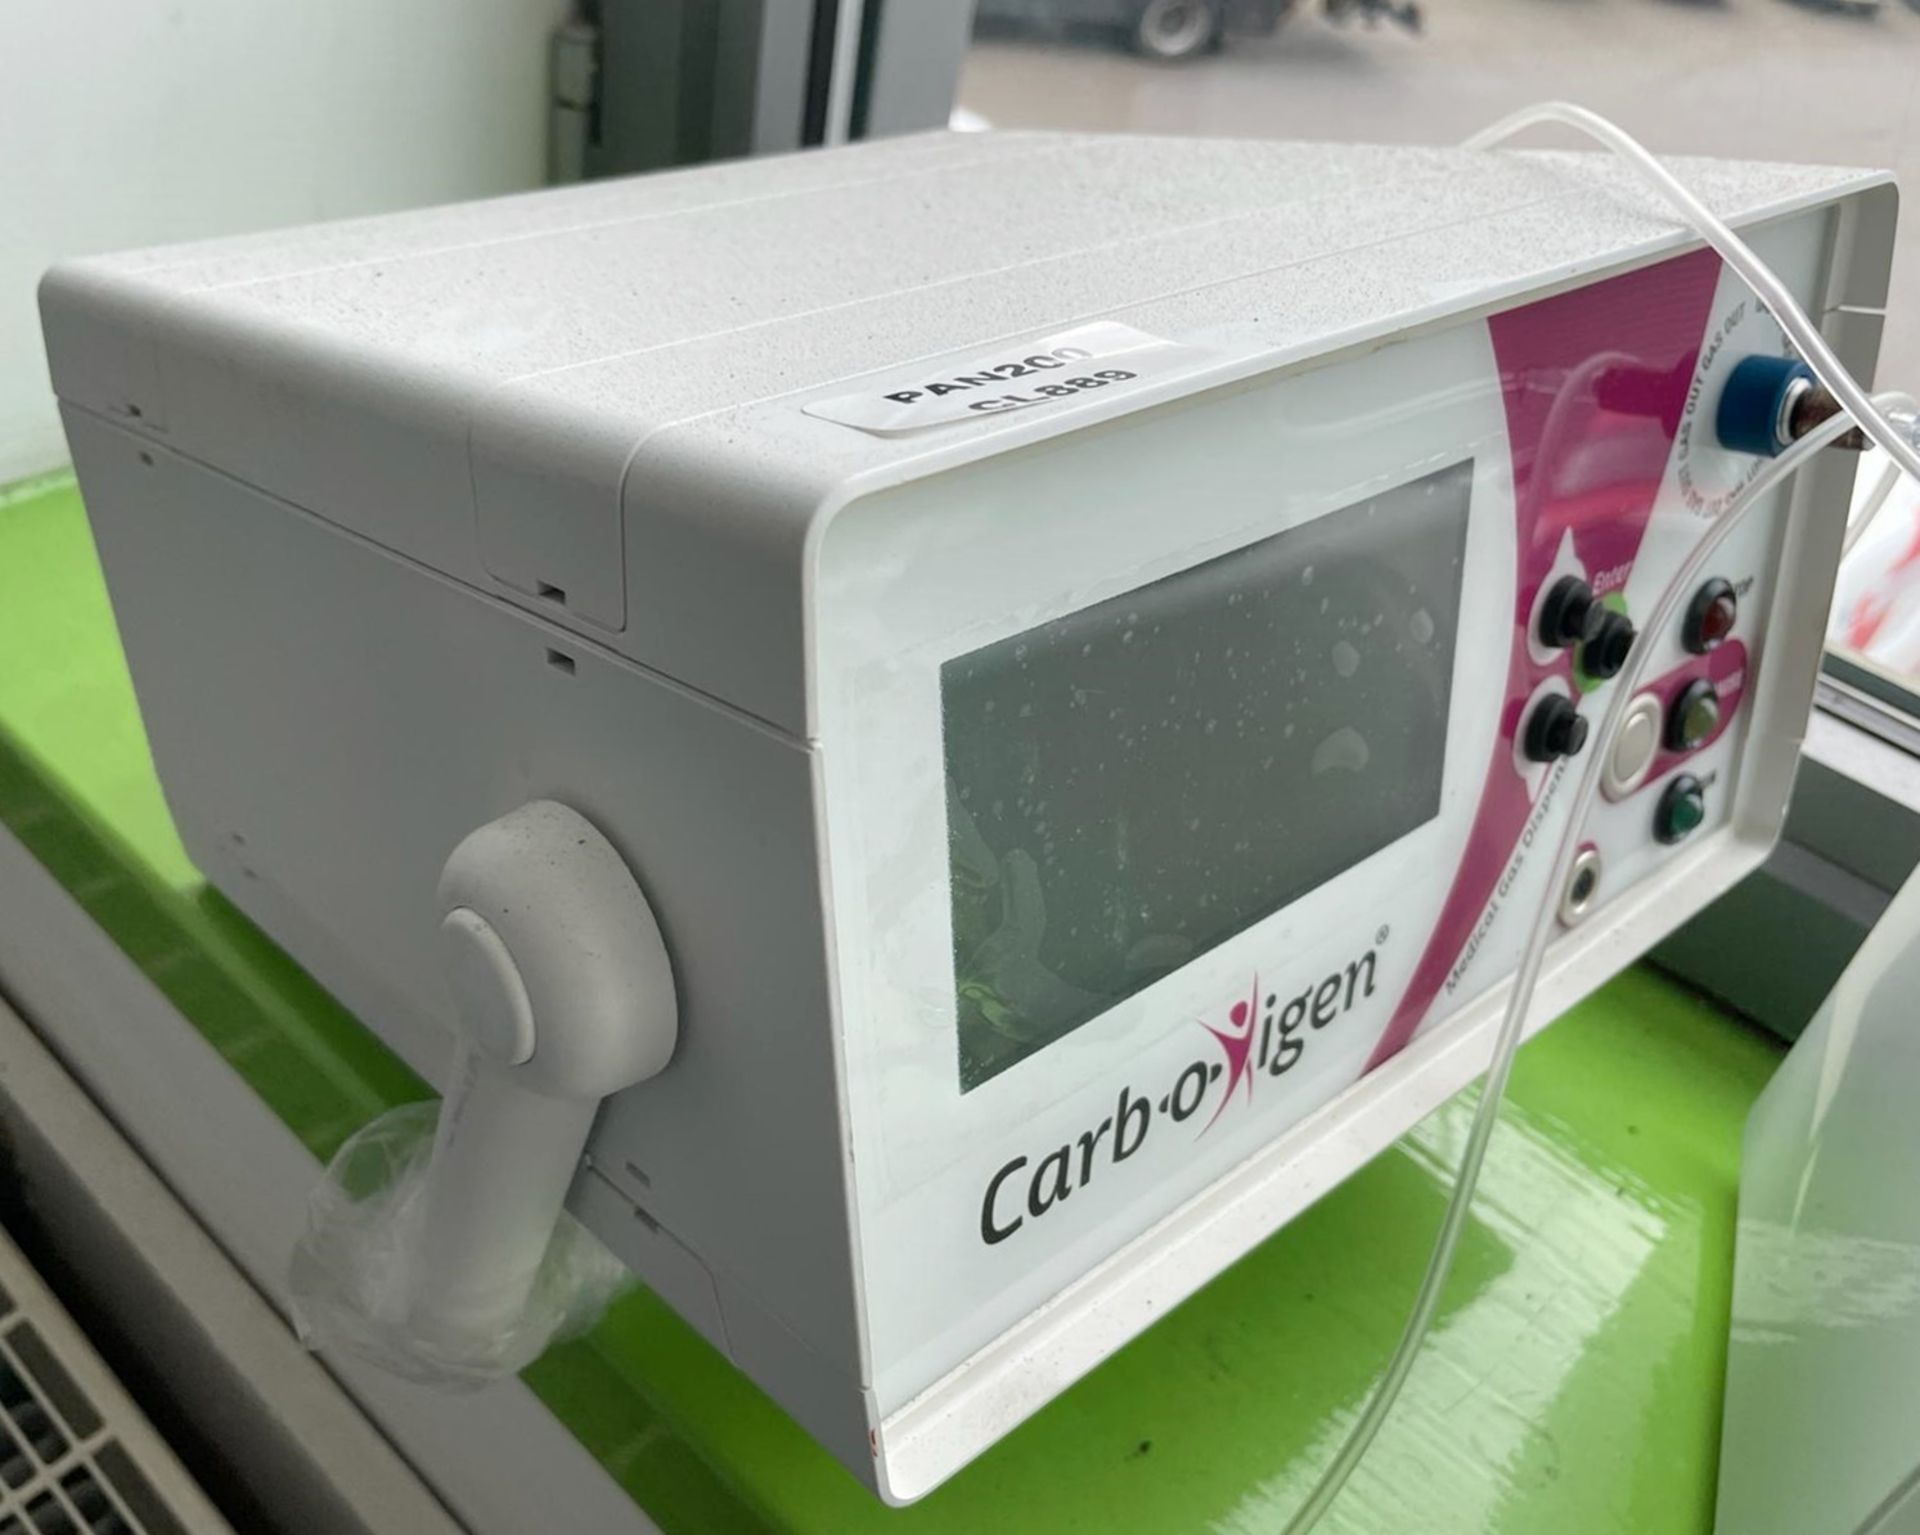 1 x Carb-O-Xygen Table Carboxytherapy Medical Gas Dispenser - For The Sterile and Personalized - Image 6 of 6